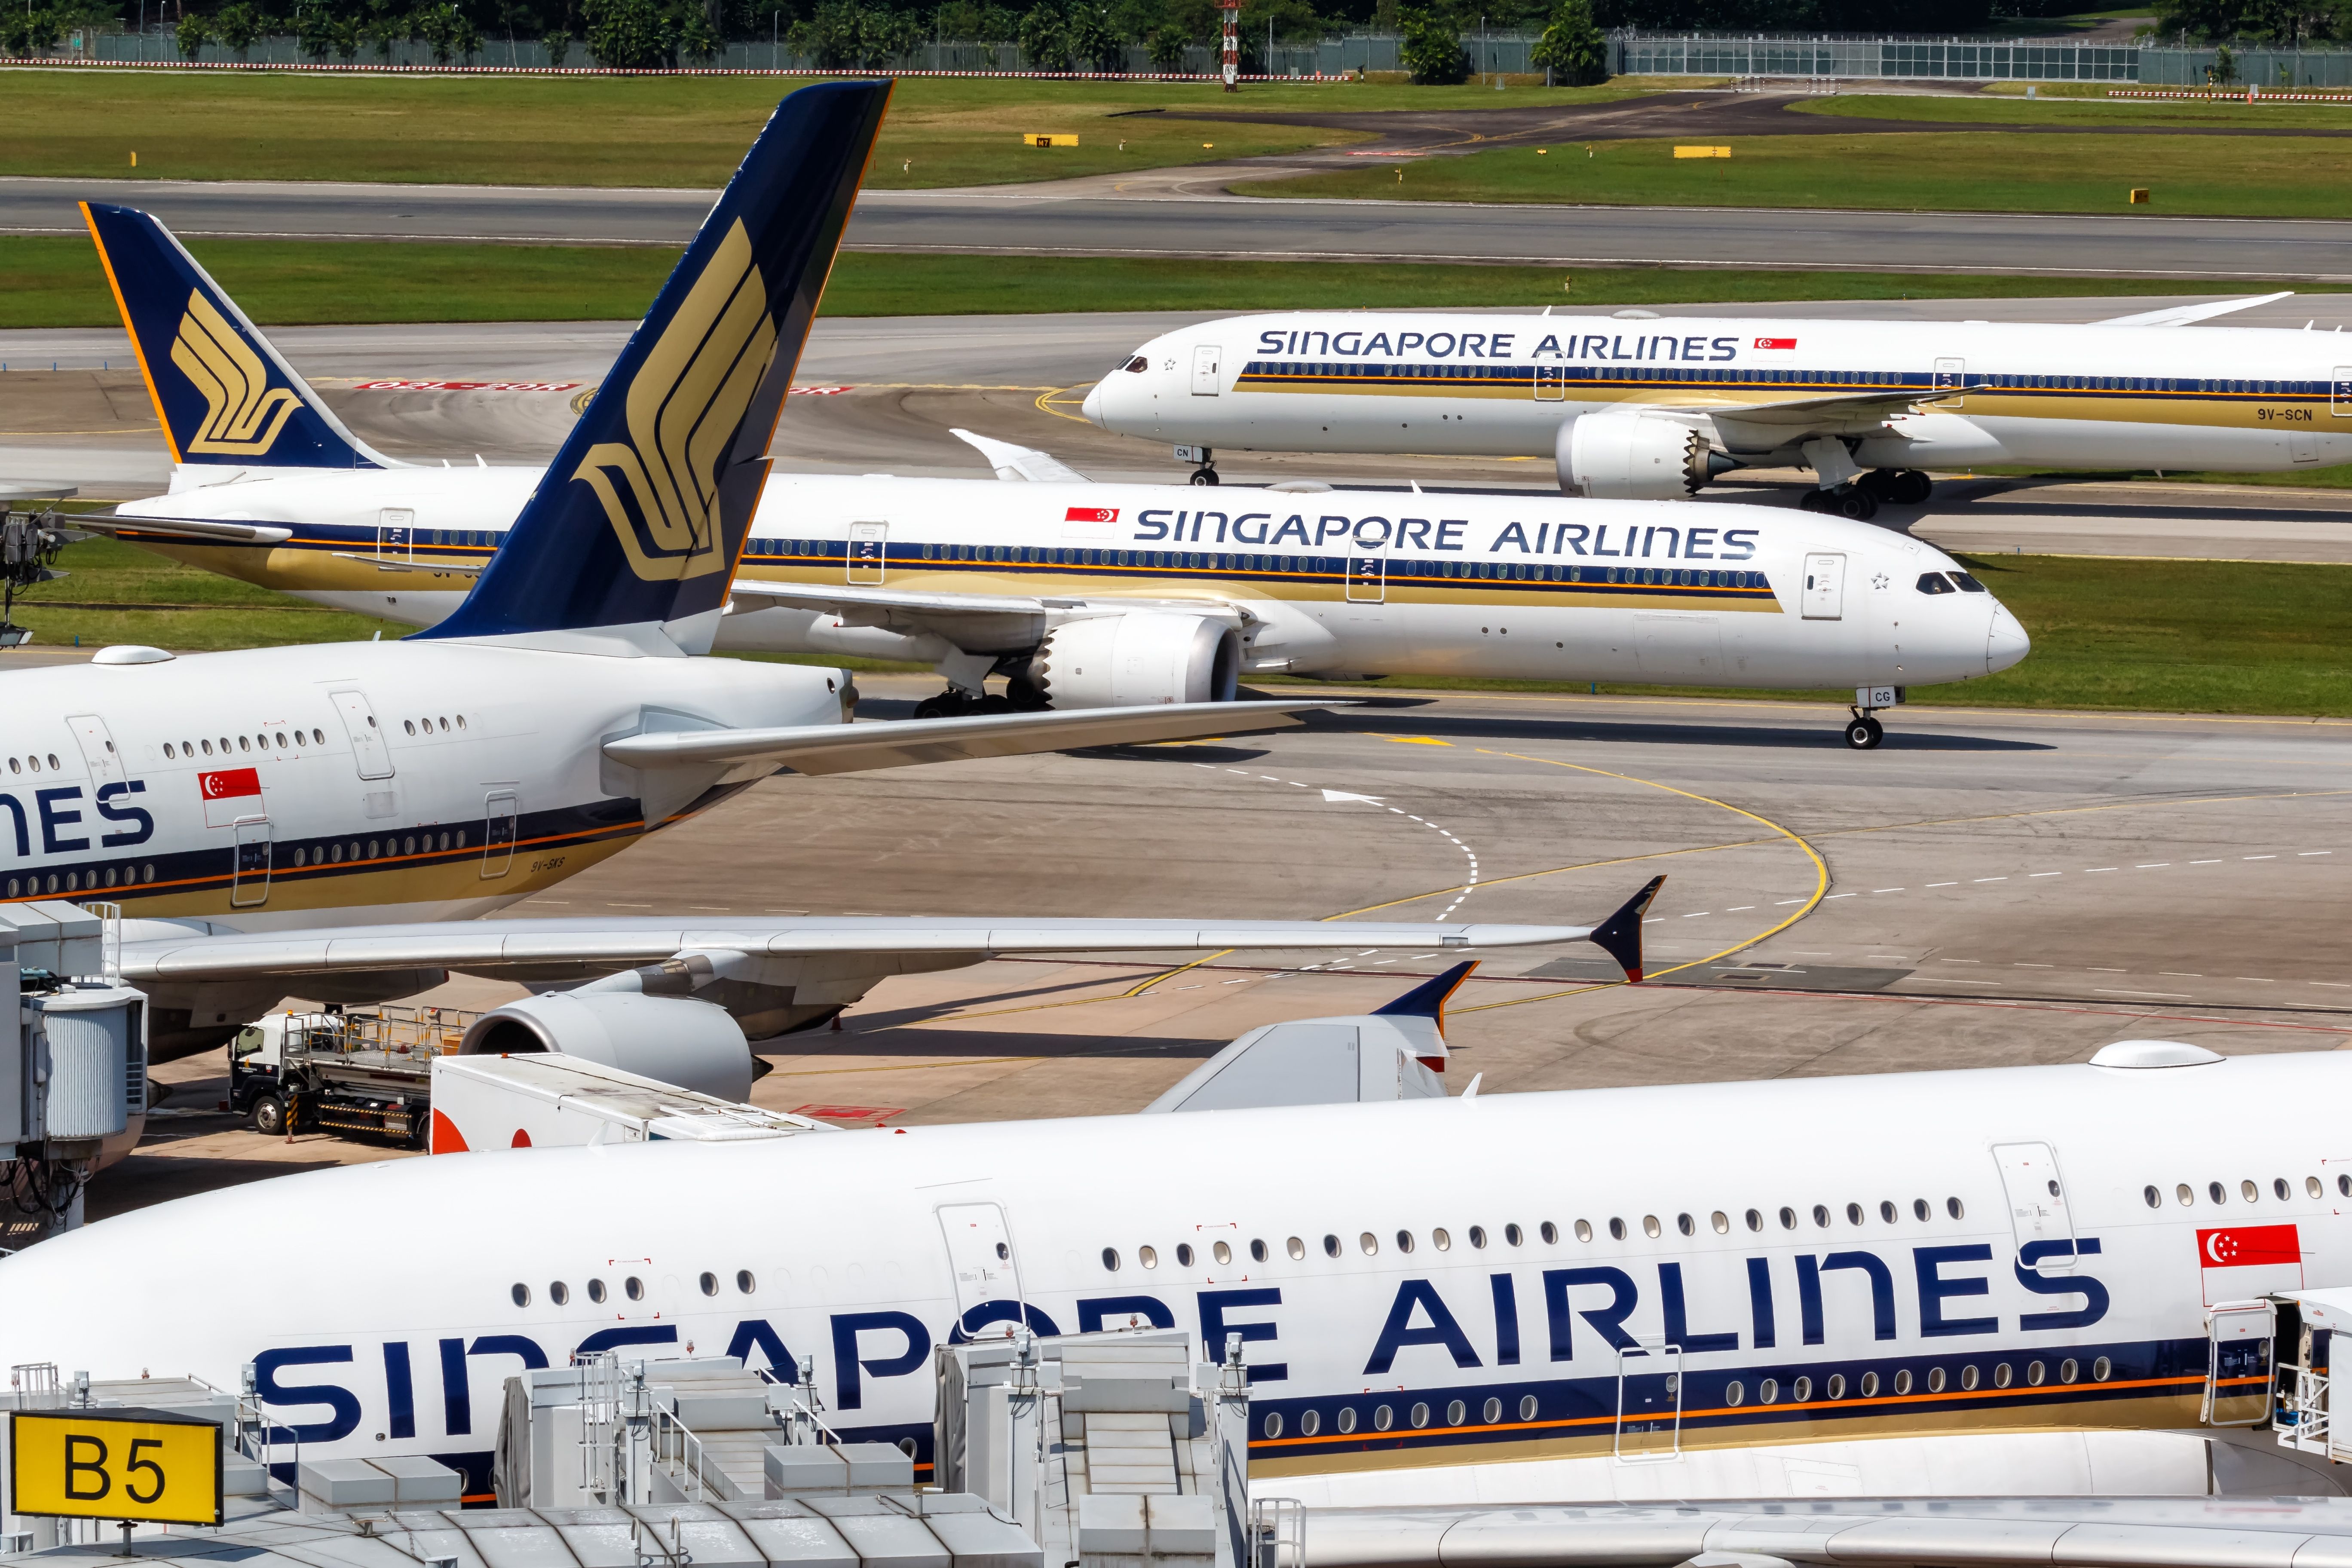 Singapore Airlines airplanes at Changi Airport 